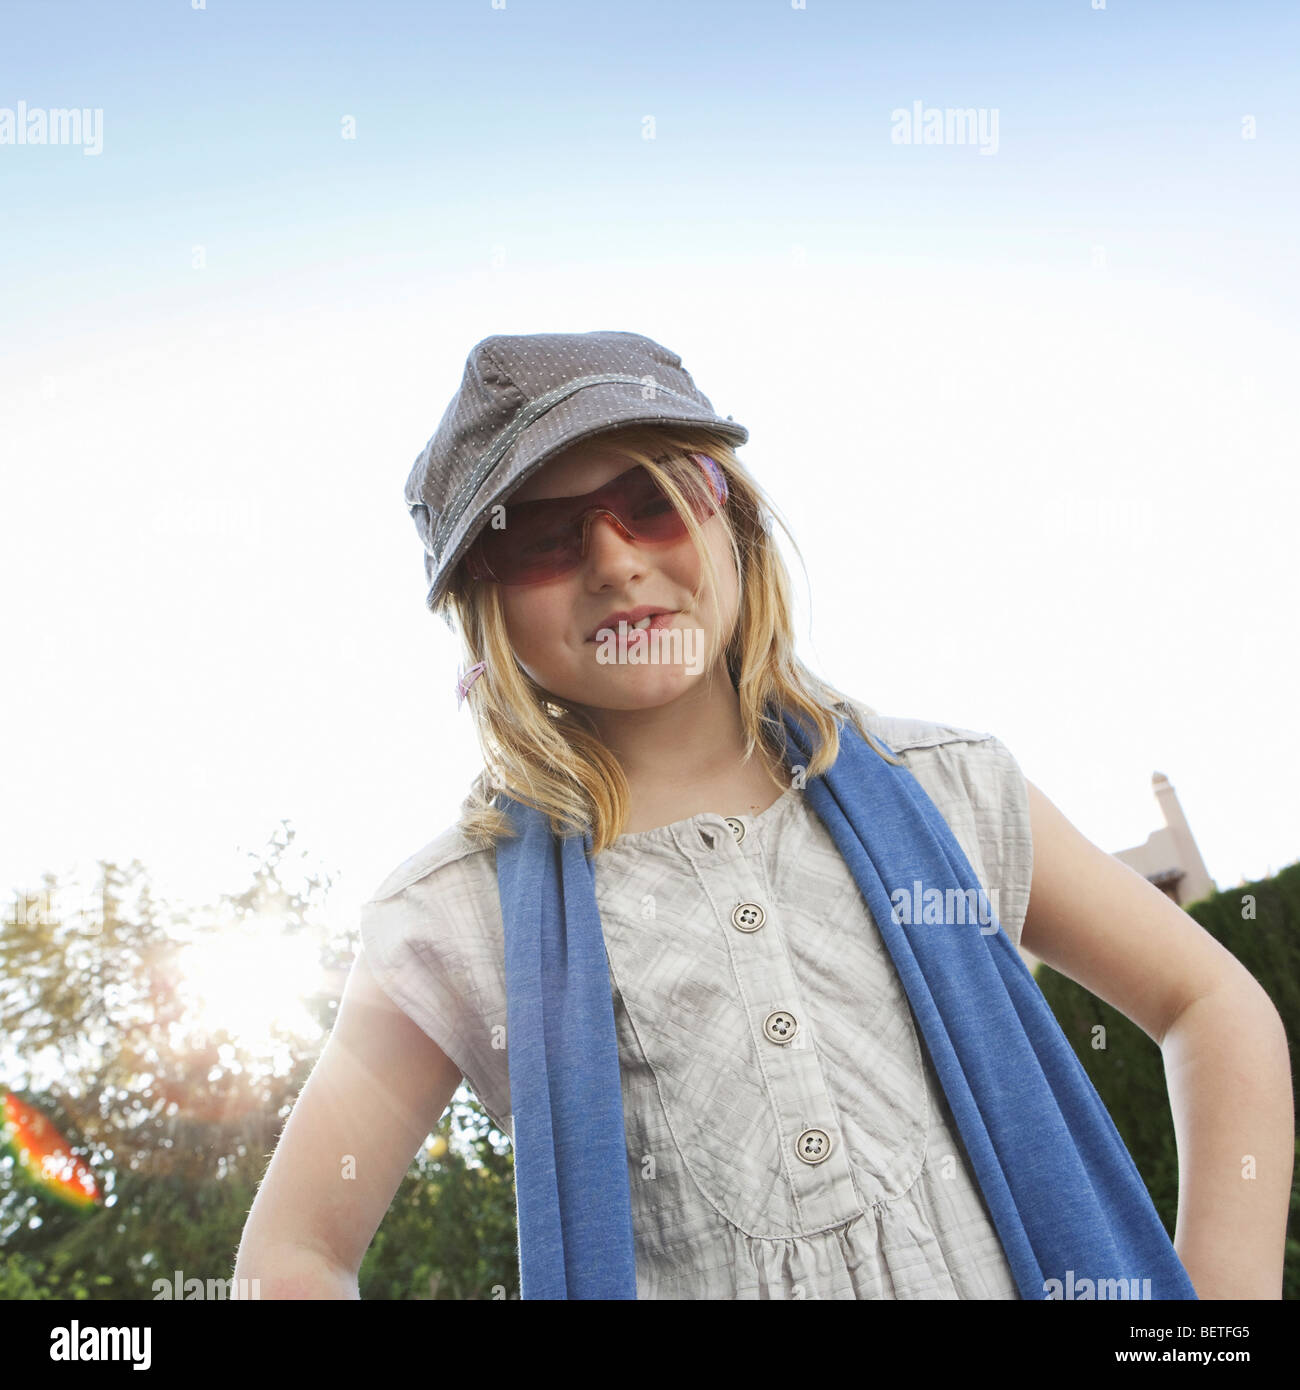 Young Girl wearing sunglasses smiling Banque D'Images